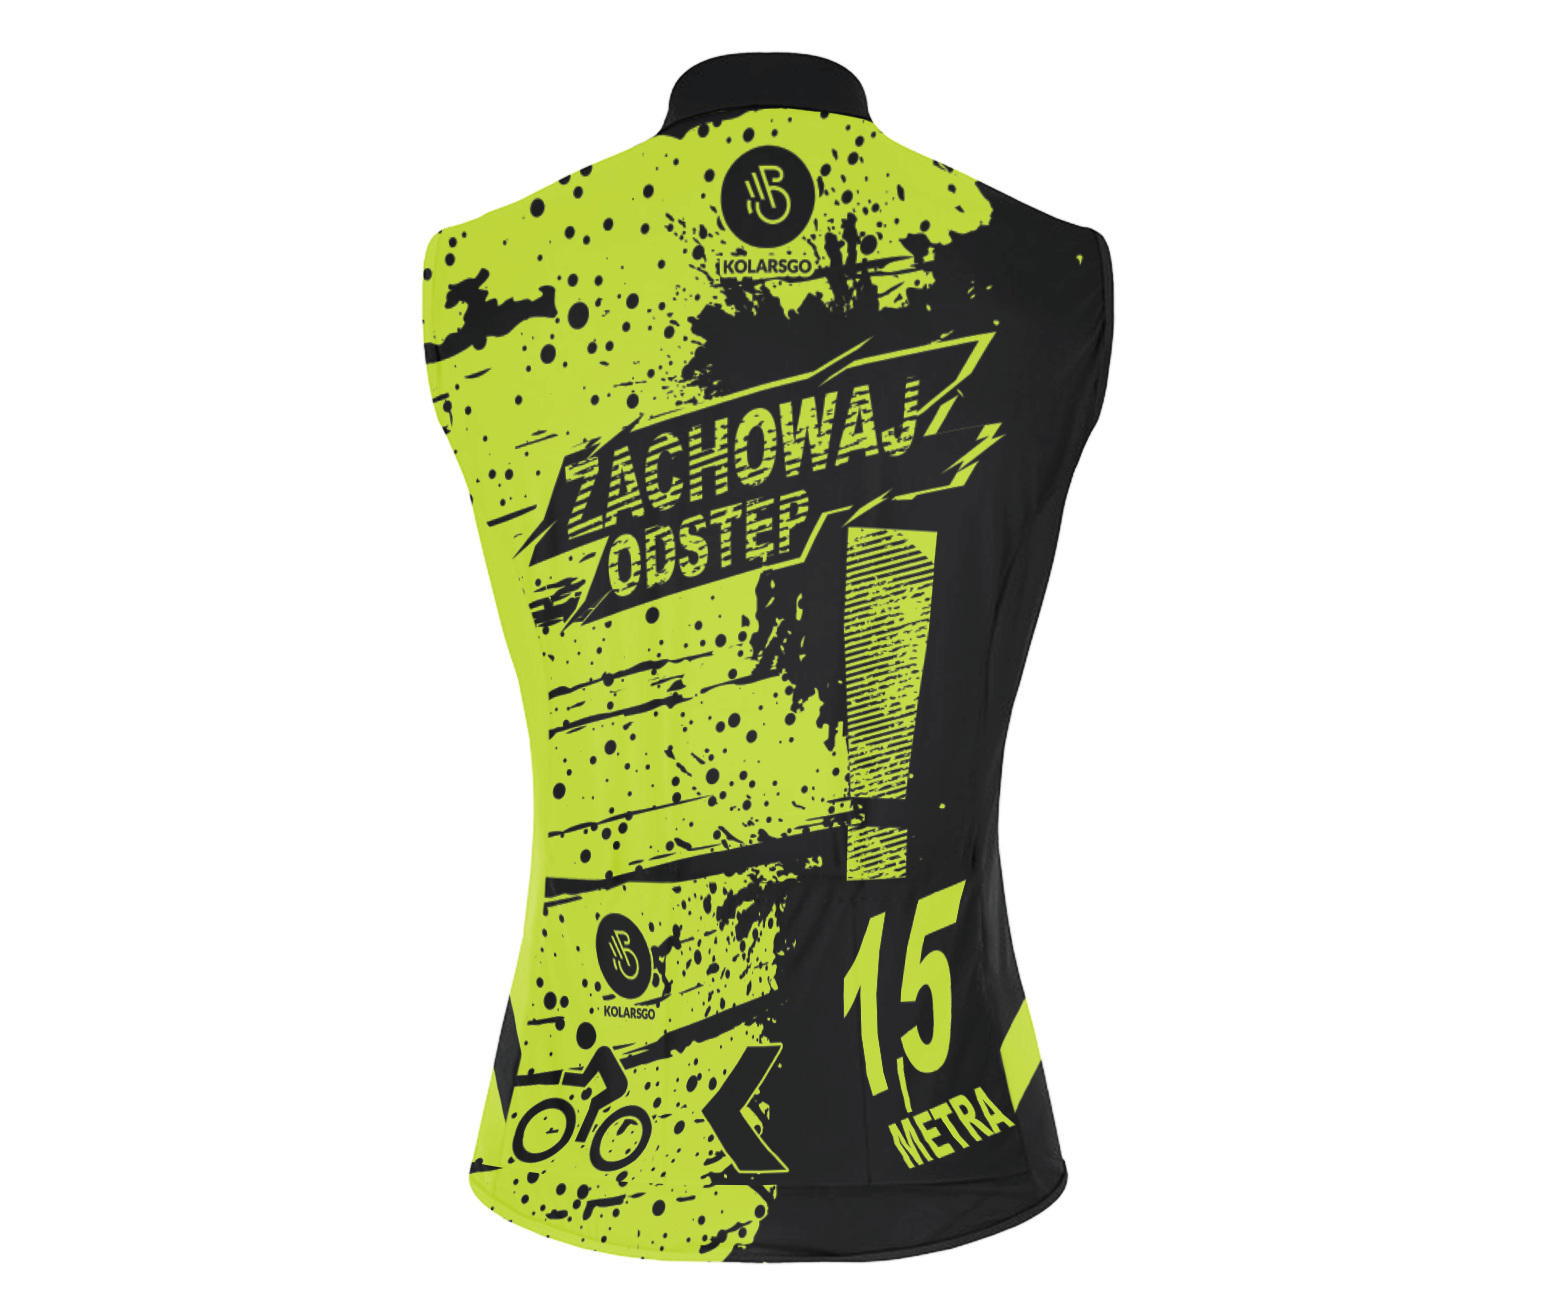 Cycling vest VISIBLE image 2